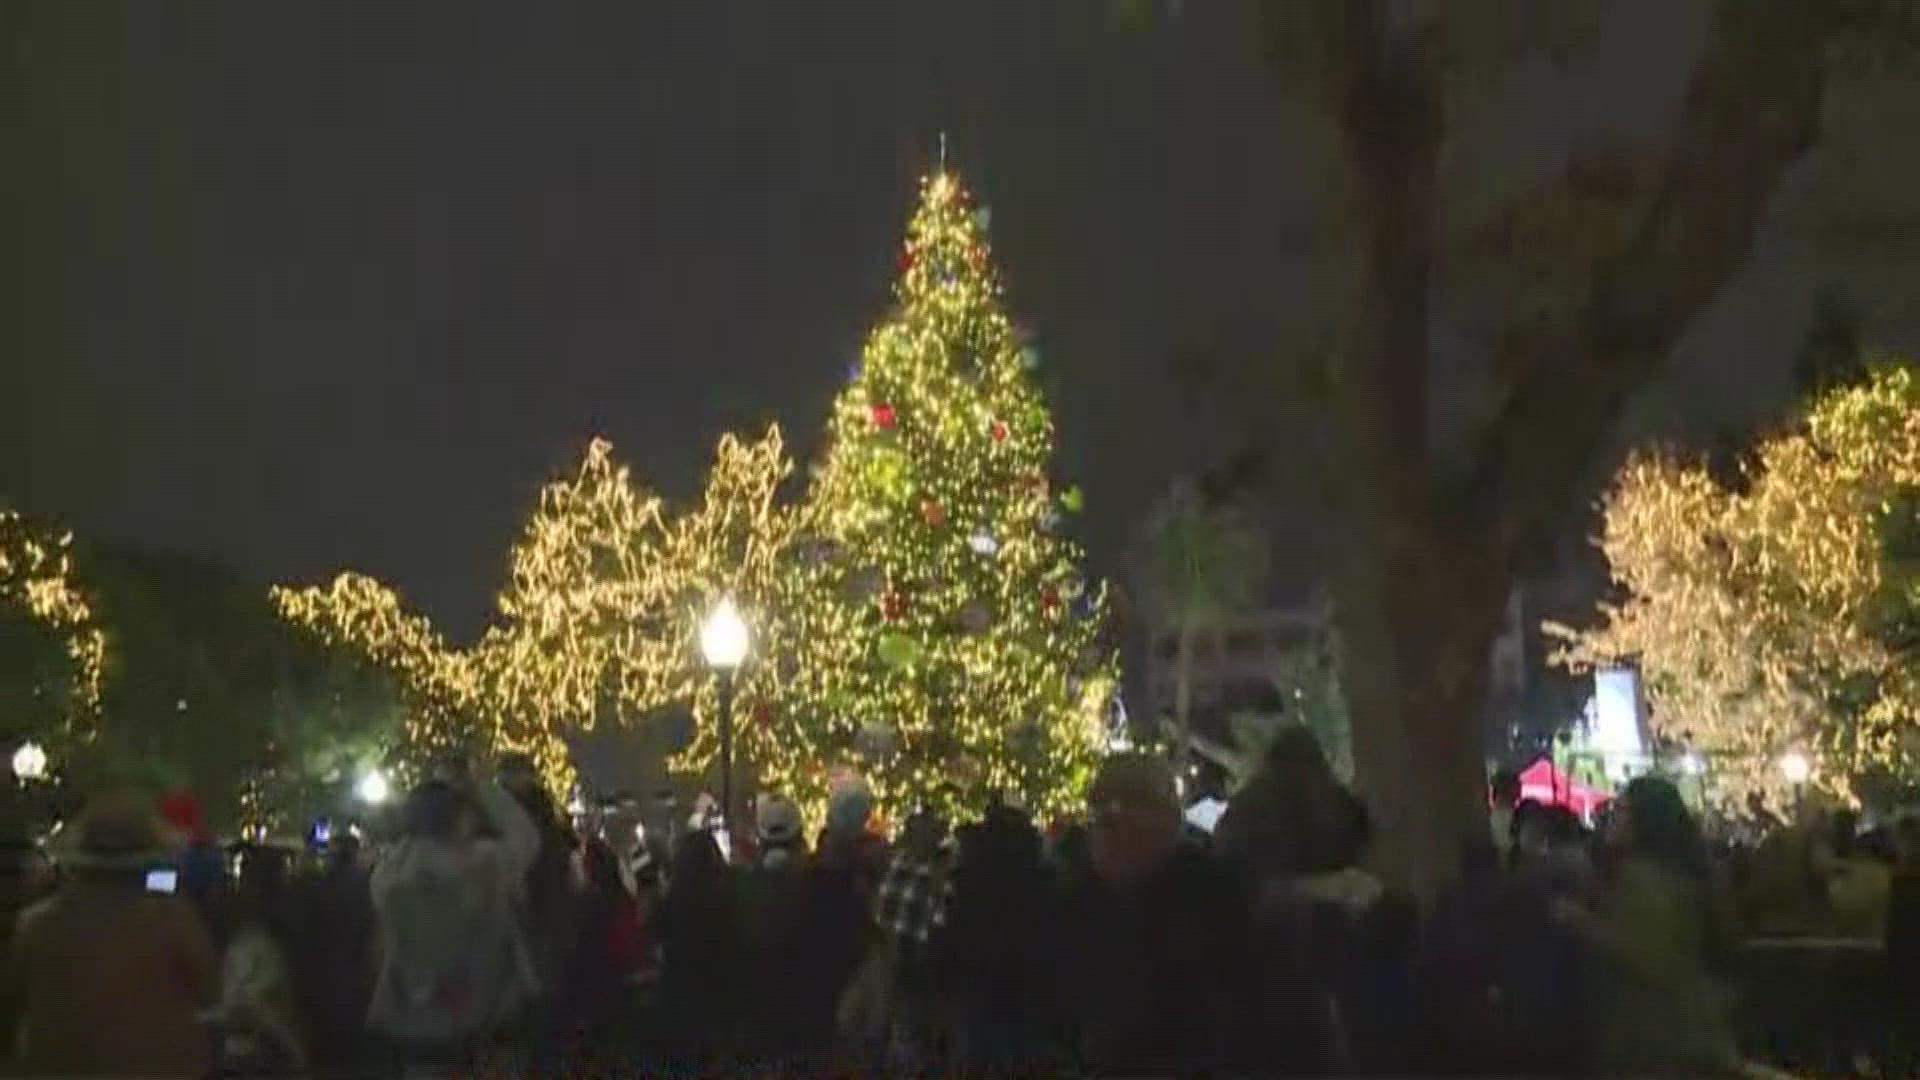 The nearly 50-foot Blue Spruce Christmas Tree is decorated with more than 10,000 white lights.